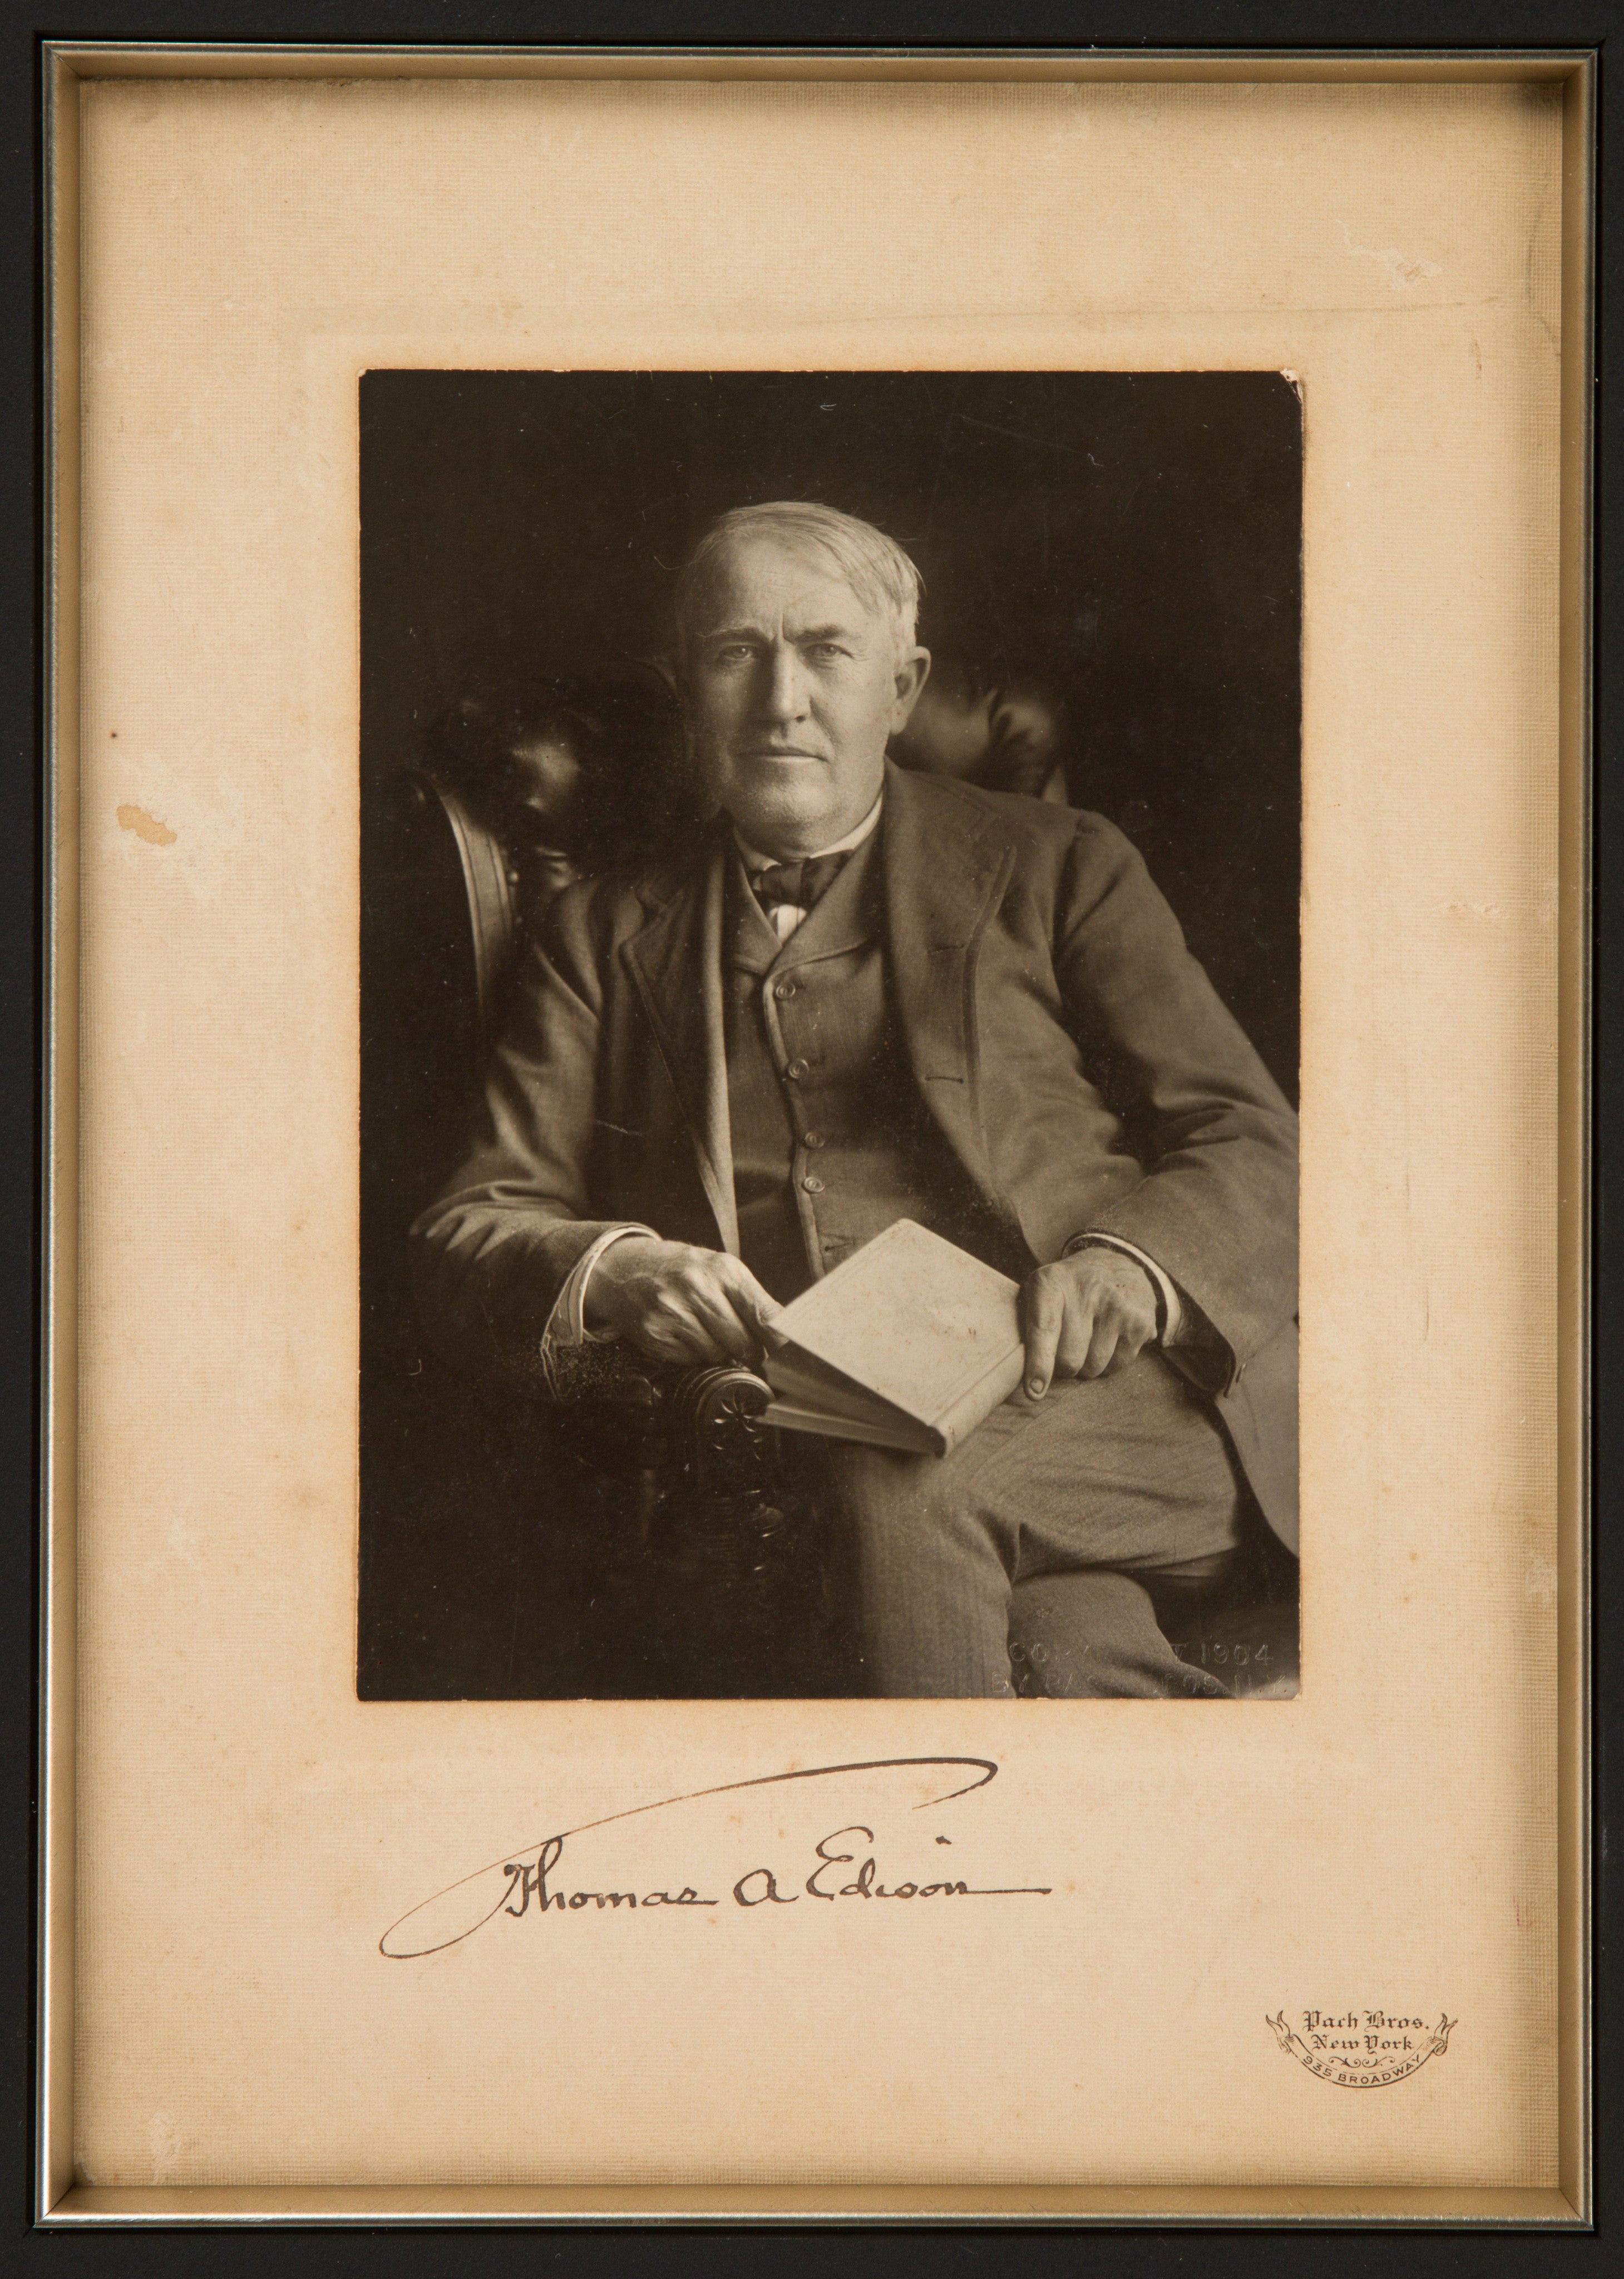 Thomas Edison Signed Early 1900’s Photo: "Don't Give Up"